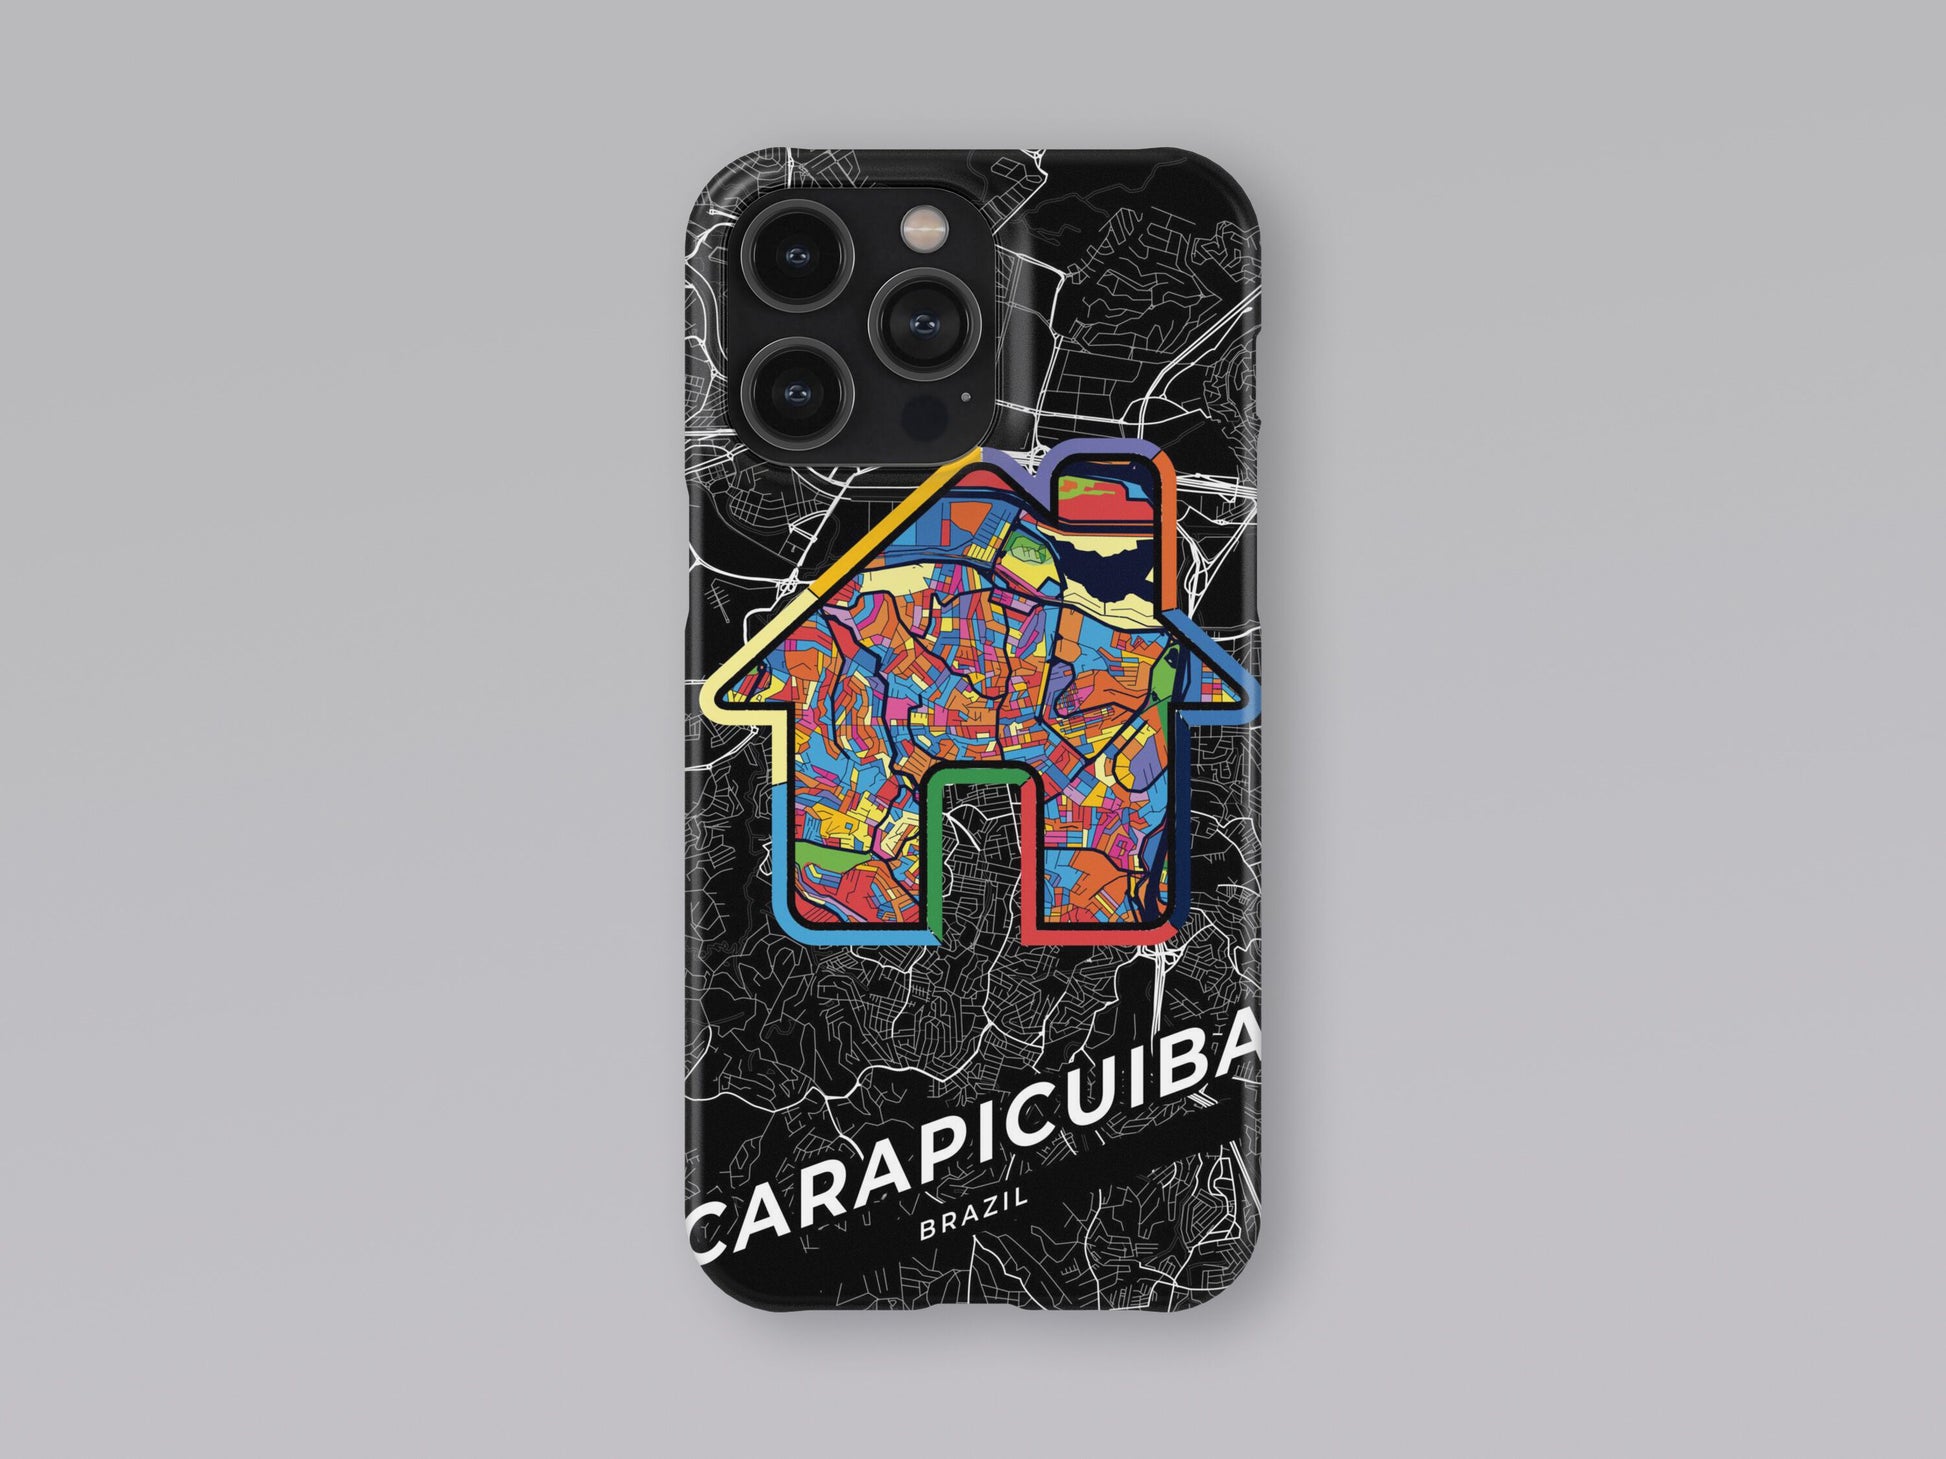 Carapicuiba Brazil slim phone case with colorful icon. Birthday, wedding or housewarming gift. Couple match cases. 3